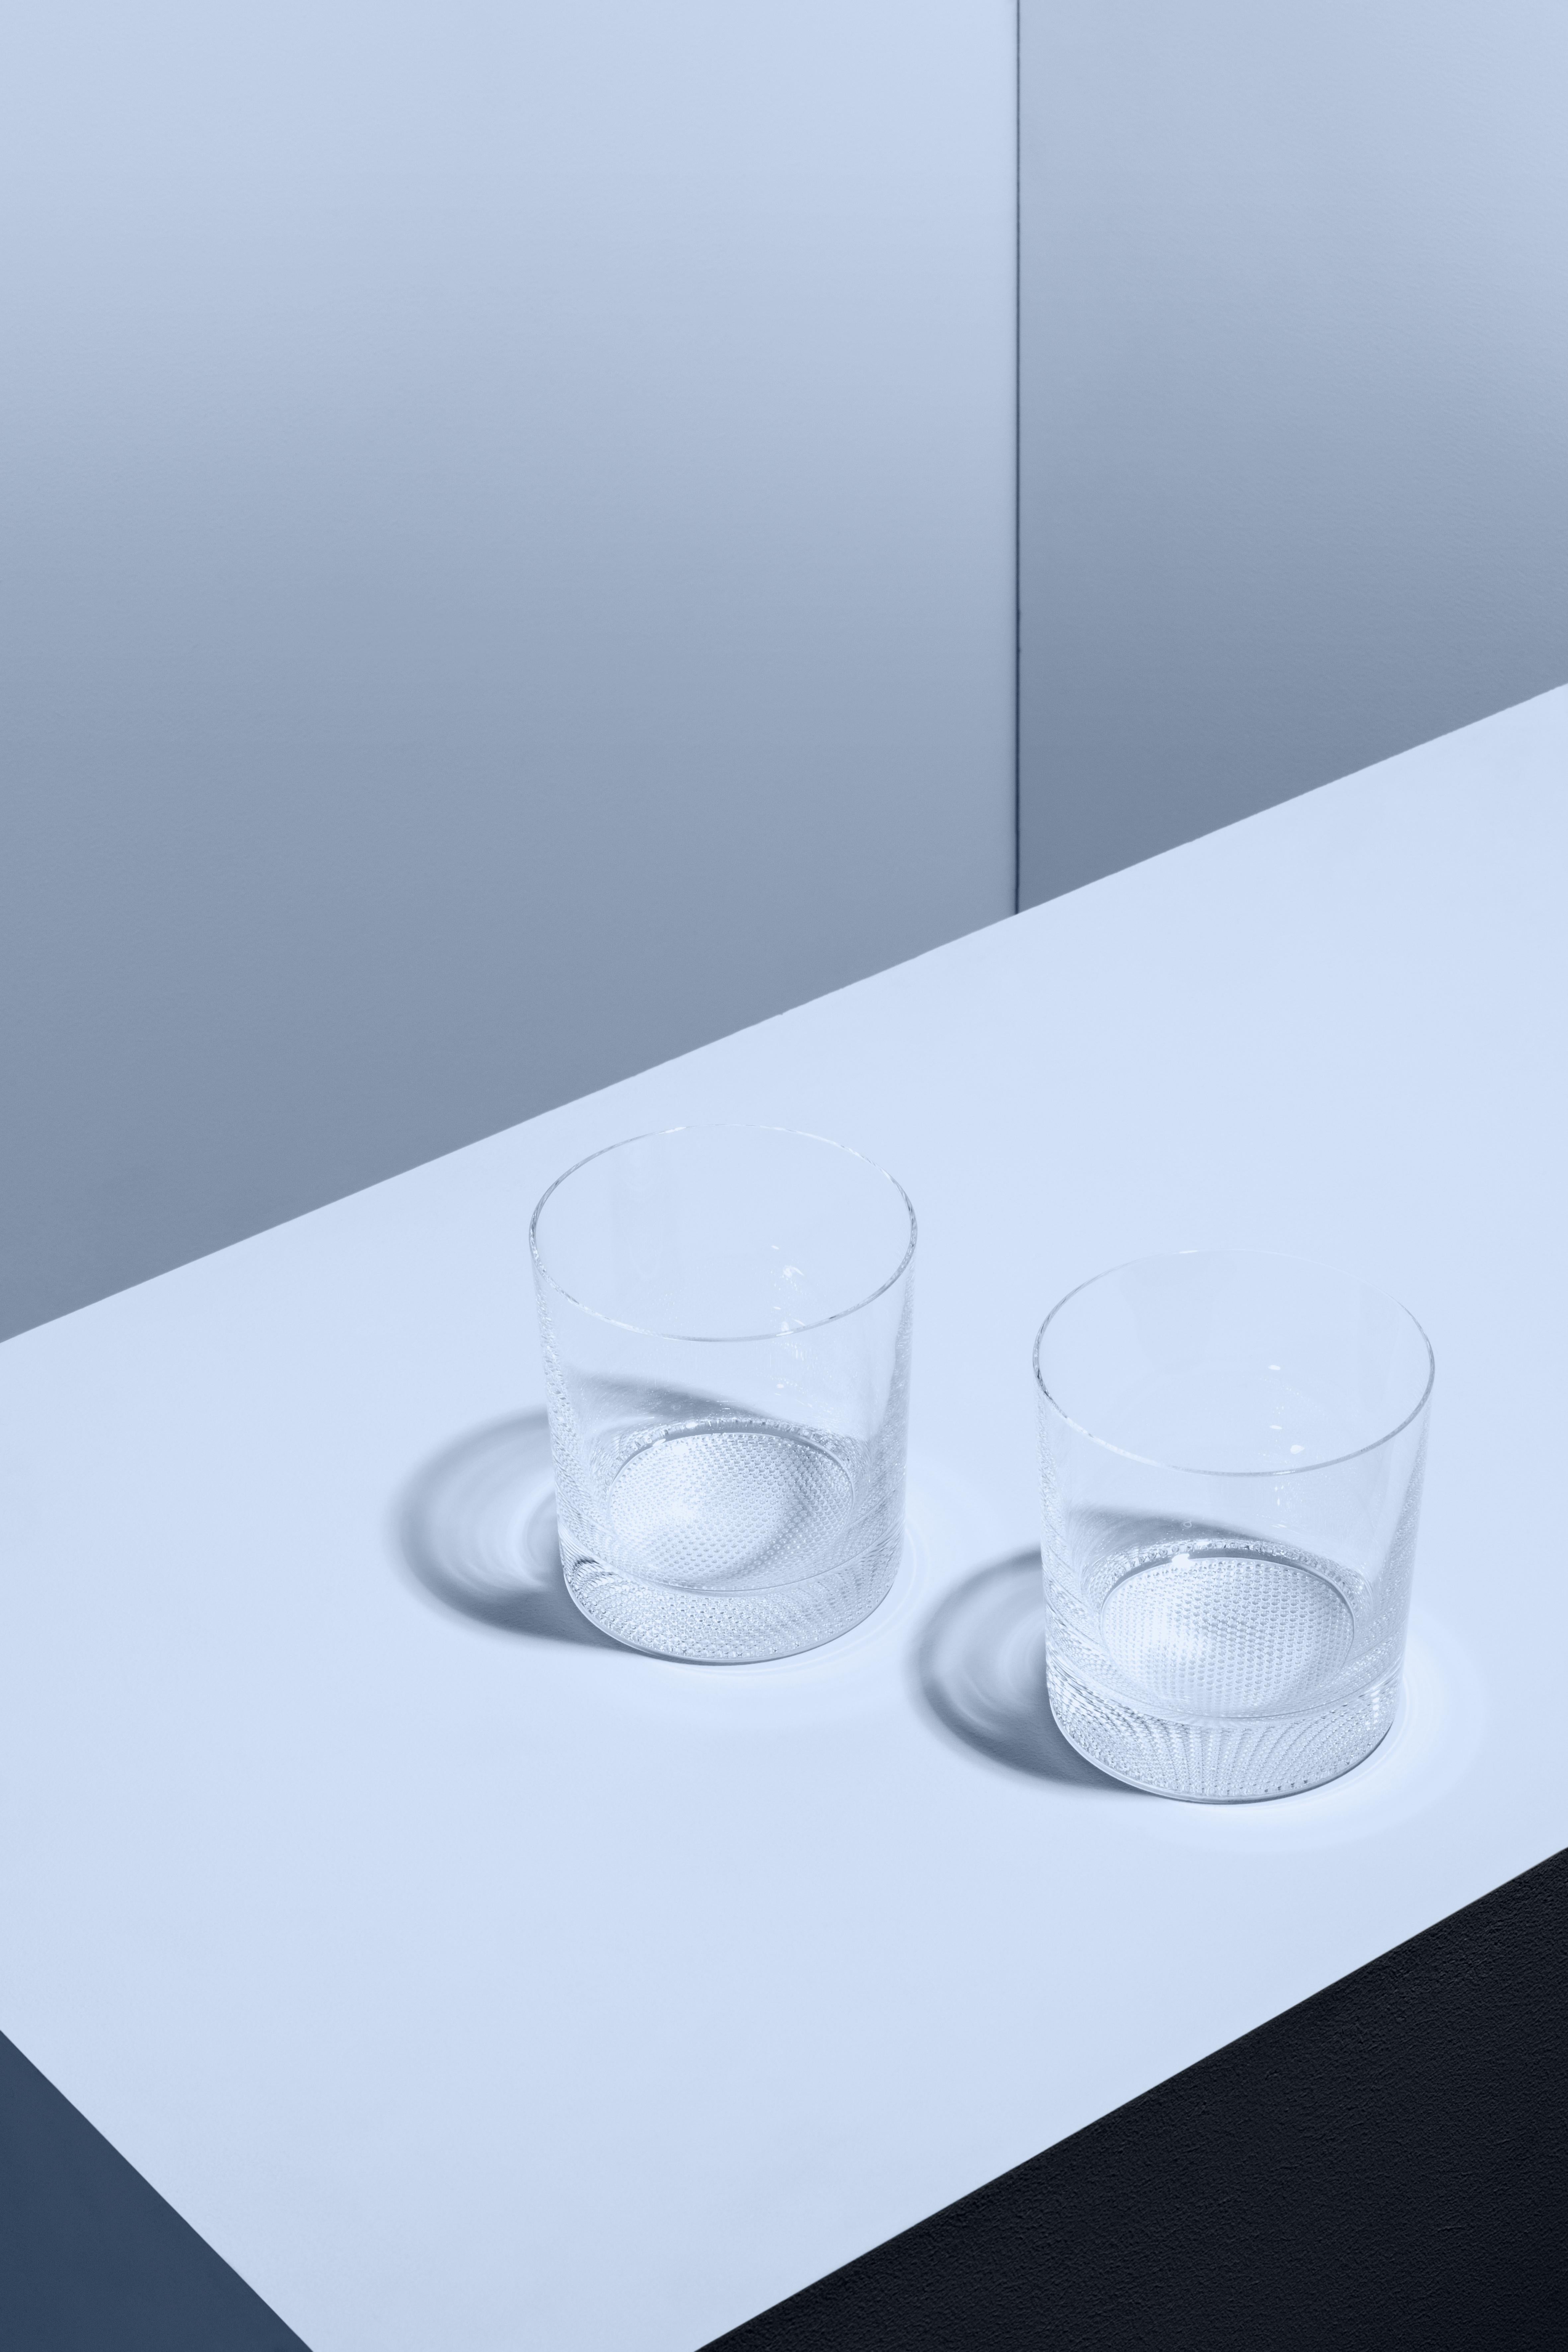 Like all the items in the Limelight collection, this Double Old Fashioned glass has the distinctive, textured base that optically reflects light. The DOF is great for chilled cocktails, with or without alcohol, or for serving liquor, and it's even